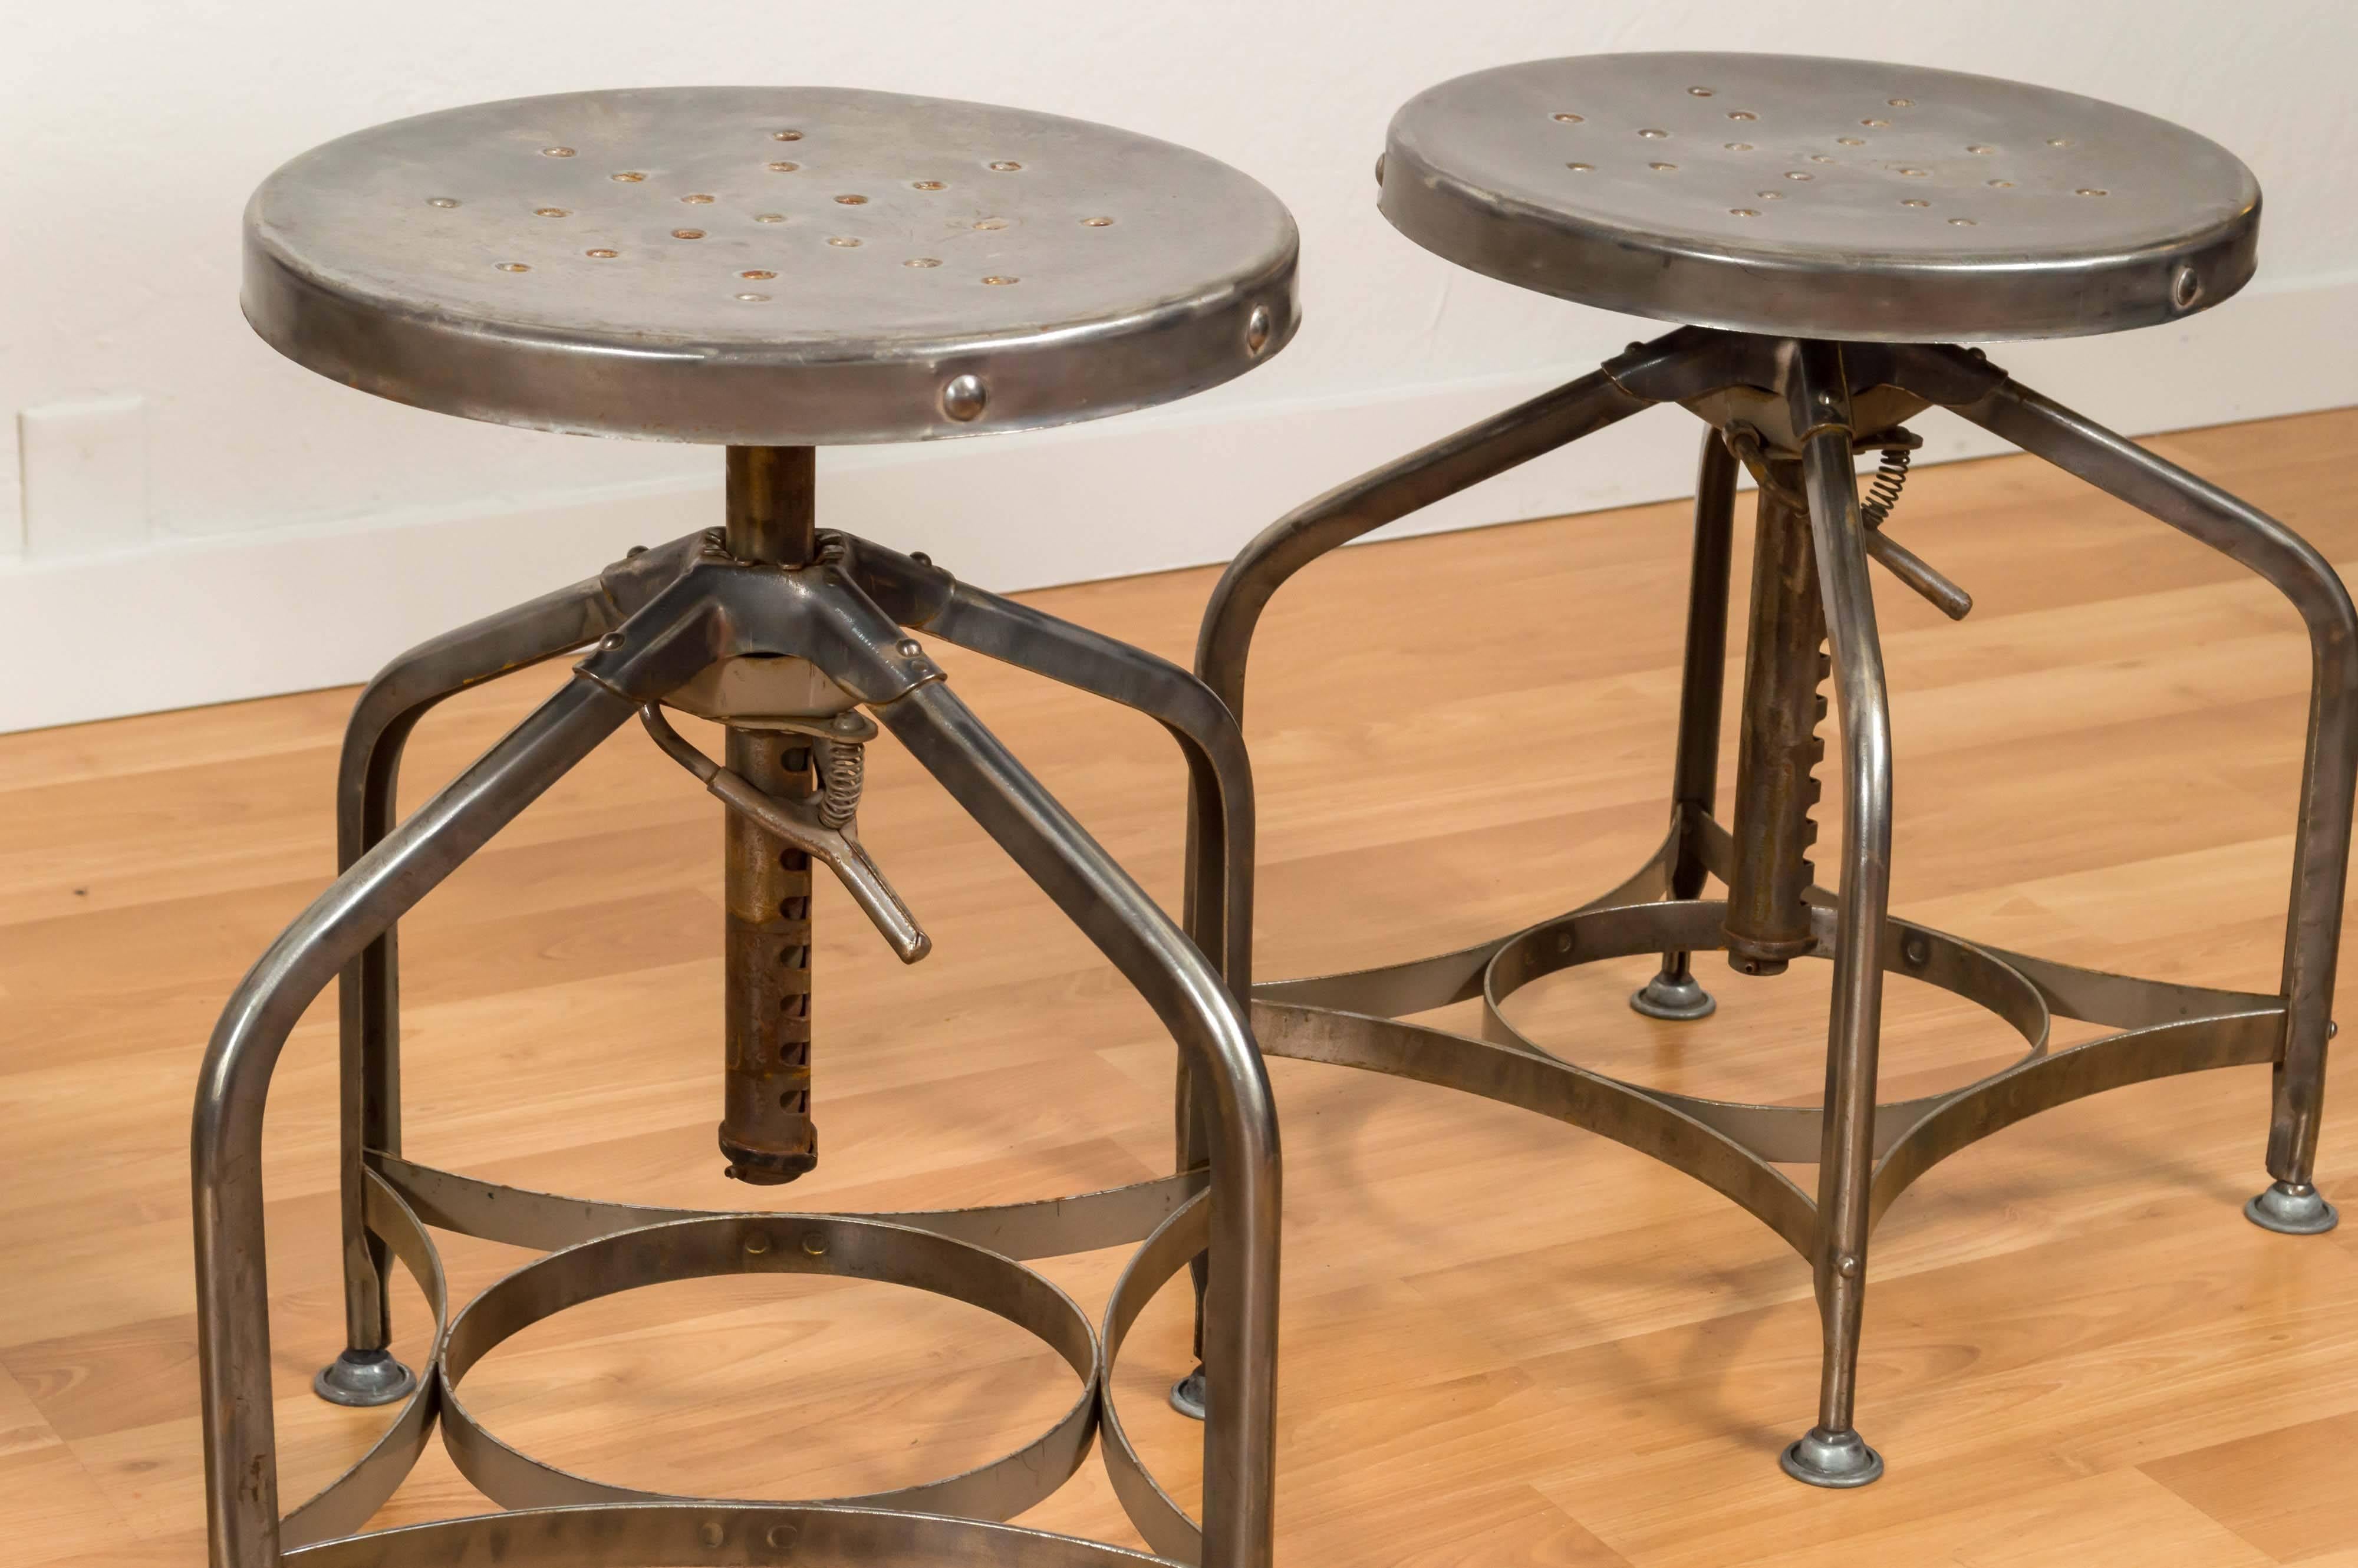 Mid-20th Century Industrial Steel Swivel Stools by Clement Uhl for Toledo Metal Manufacturing Co